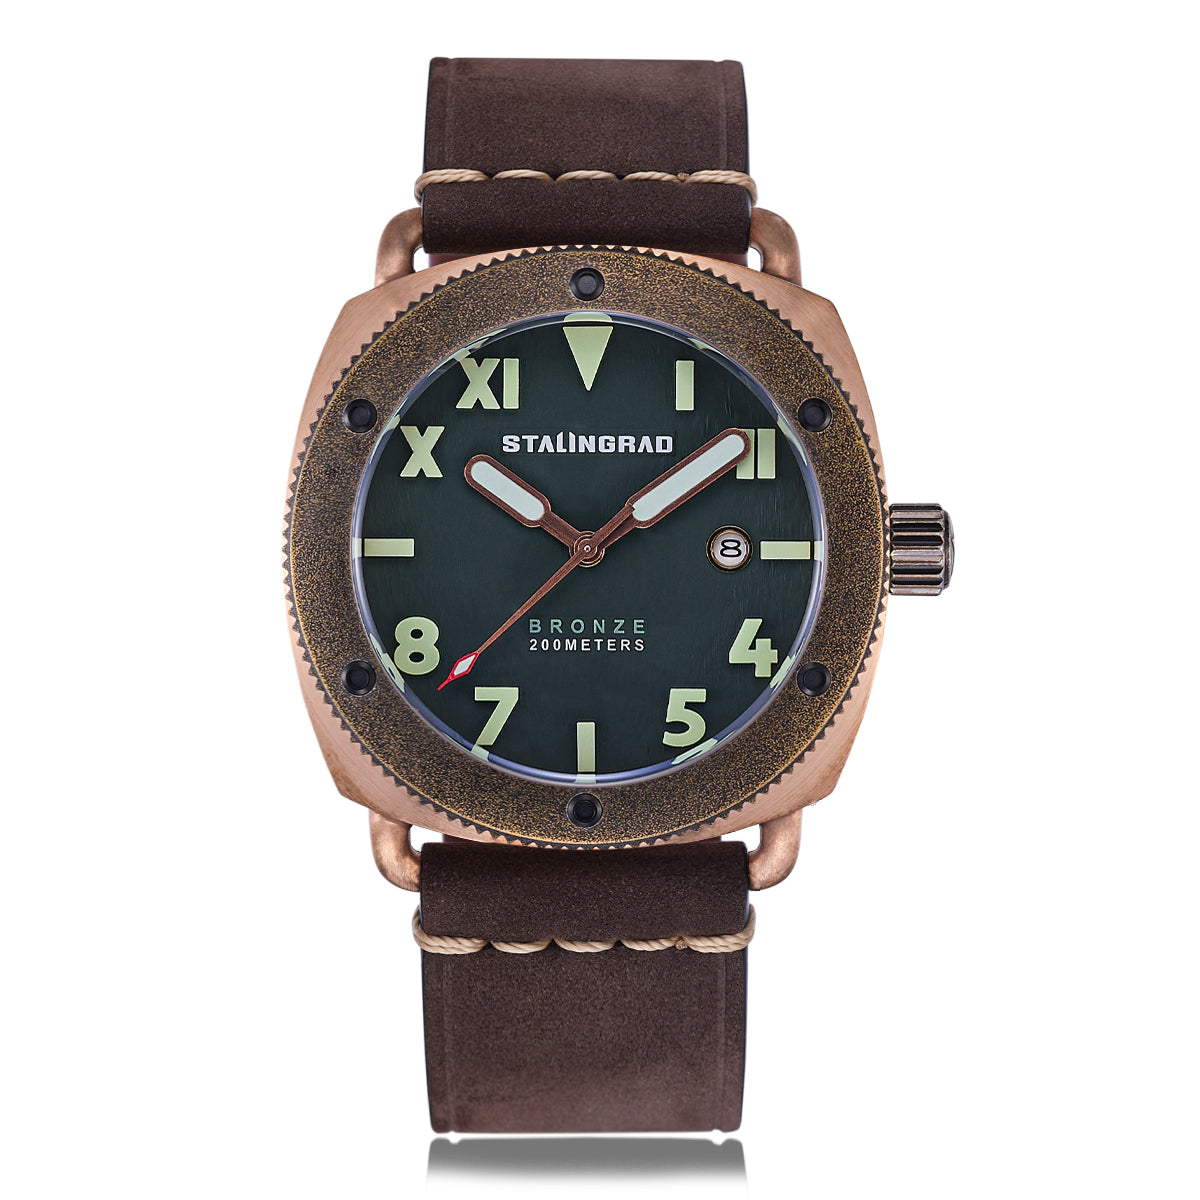 Bronze Defender 200M. Green Dial. Brown Leather Strap. 45mm. SG-0609-03